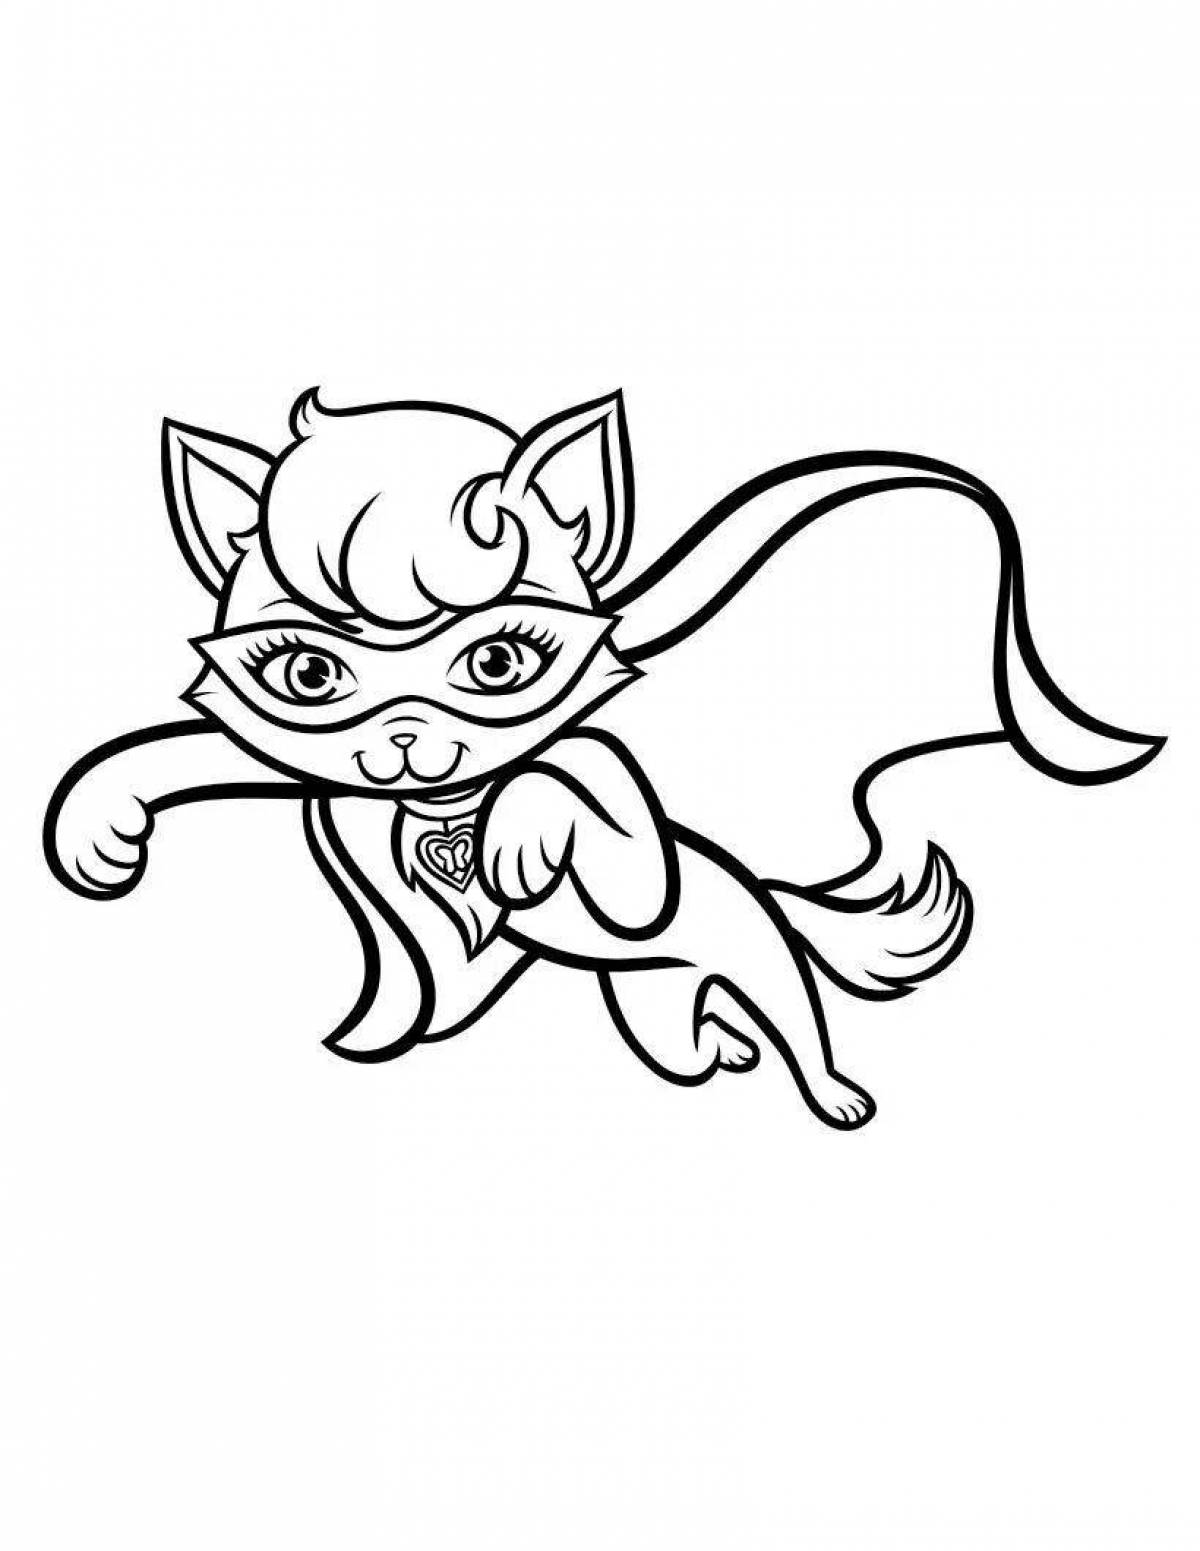 Cute super meow coloring book for kids